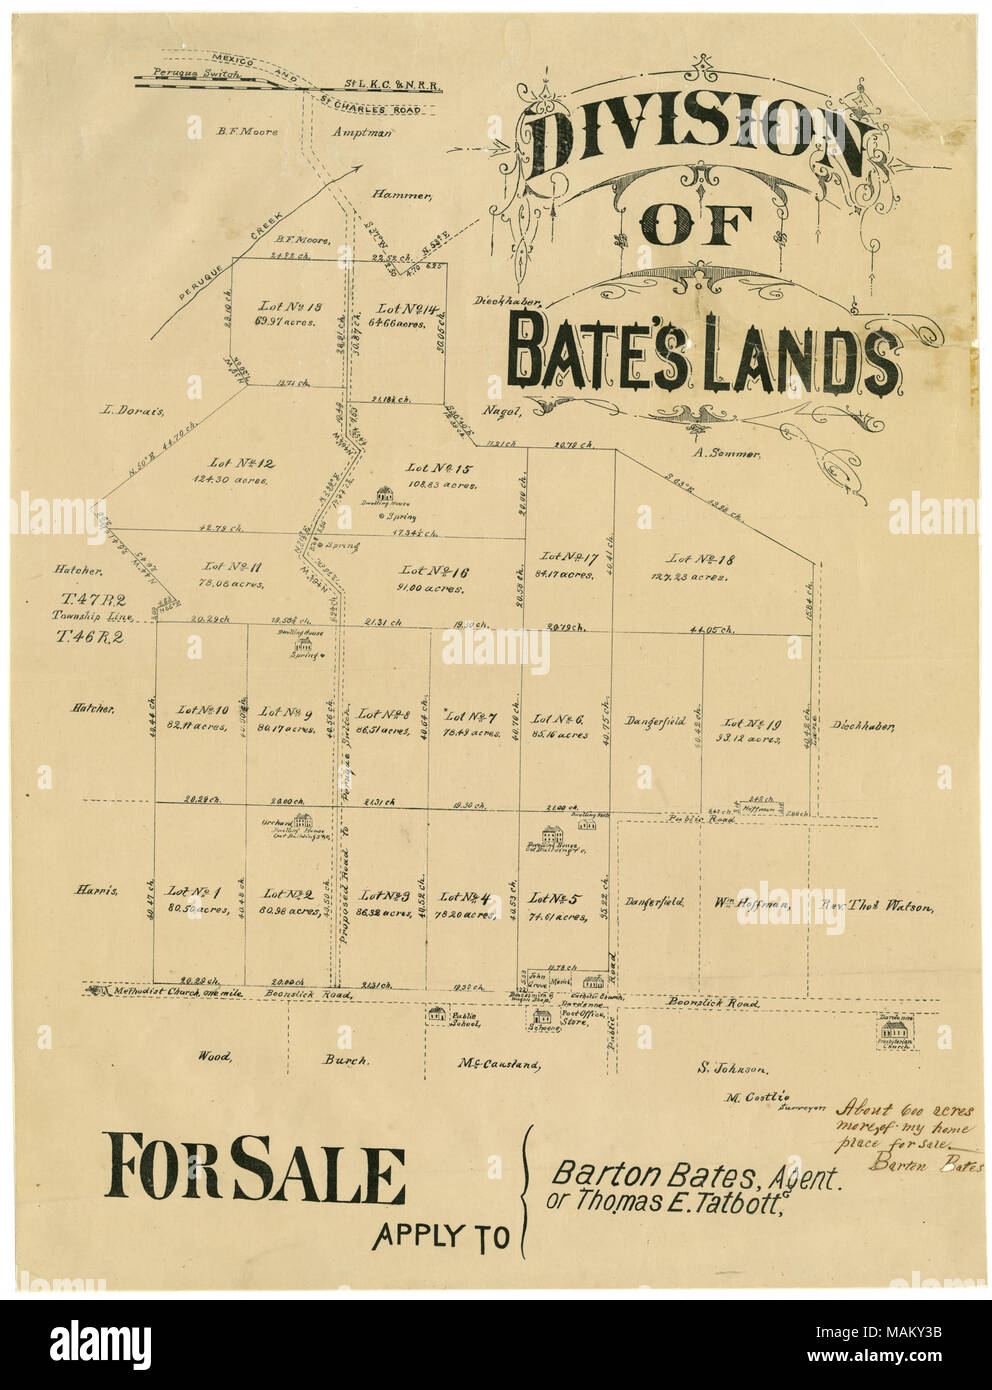 About 600 acres, plats between St. Charles road and Boonslick road, with sketches of Dardenne post office, store, wagon shop, blacksmith shop, churches, homes. 'Apply to Barton Bates, agent, or Thomas E. Talbott.' Title: Poster advertising the division of Bates' lands, ca. 1870  . circa 1870. Bates, Barton Stock Photo